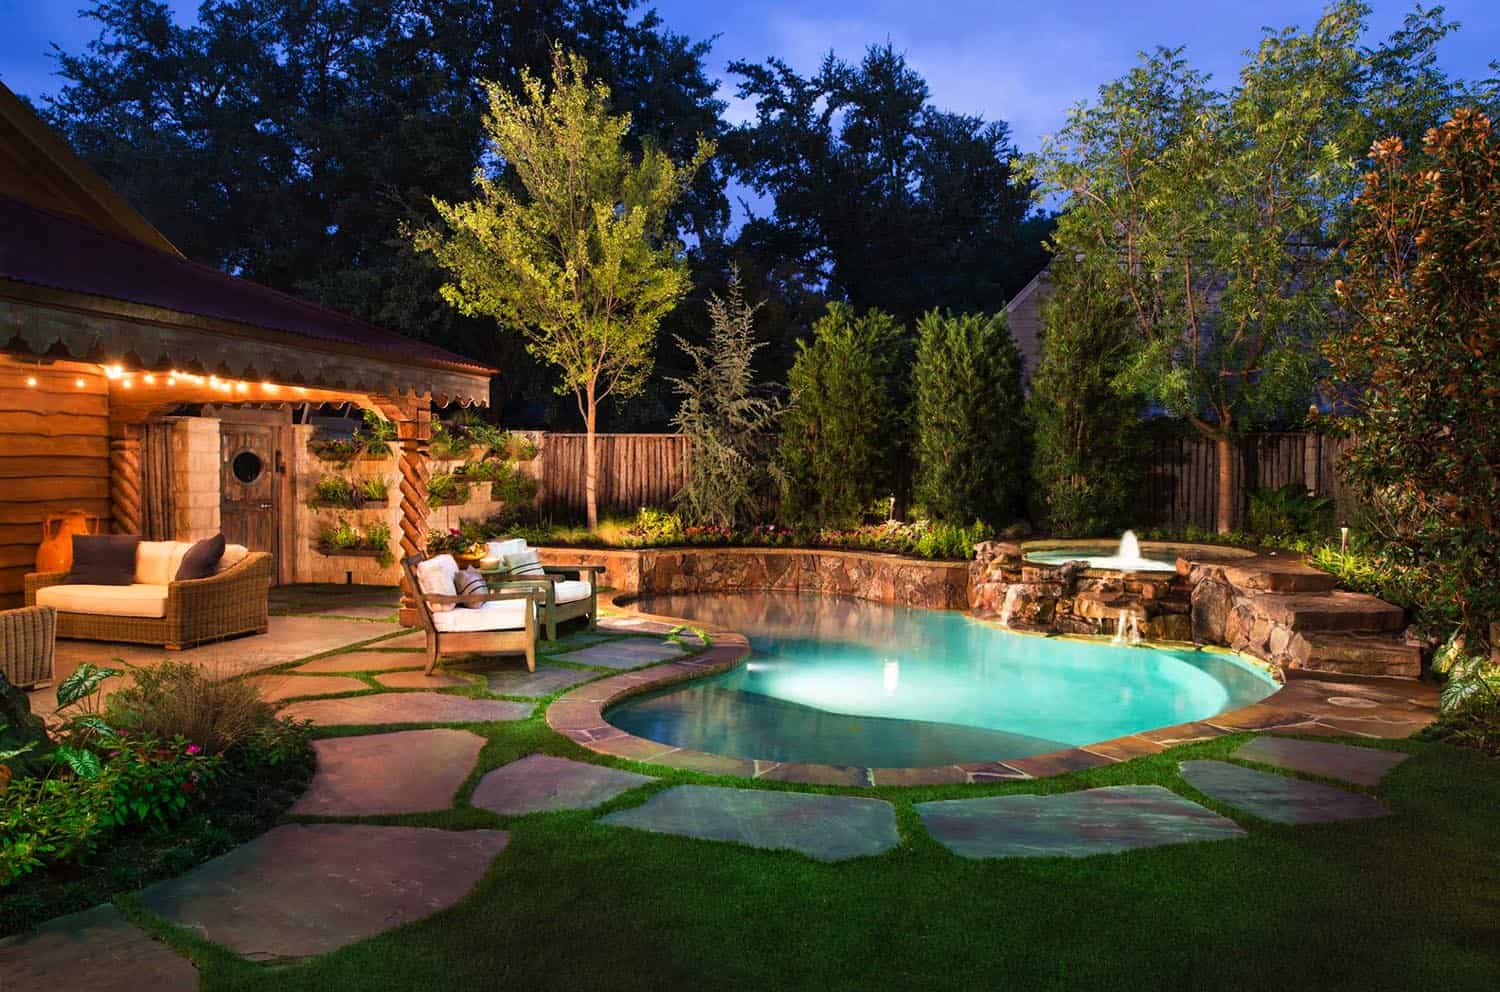 Poolside Oasis Top 10 Outdoor Living Spaces for Unforgettable Family Moments - 2